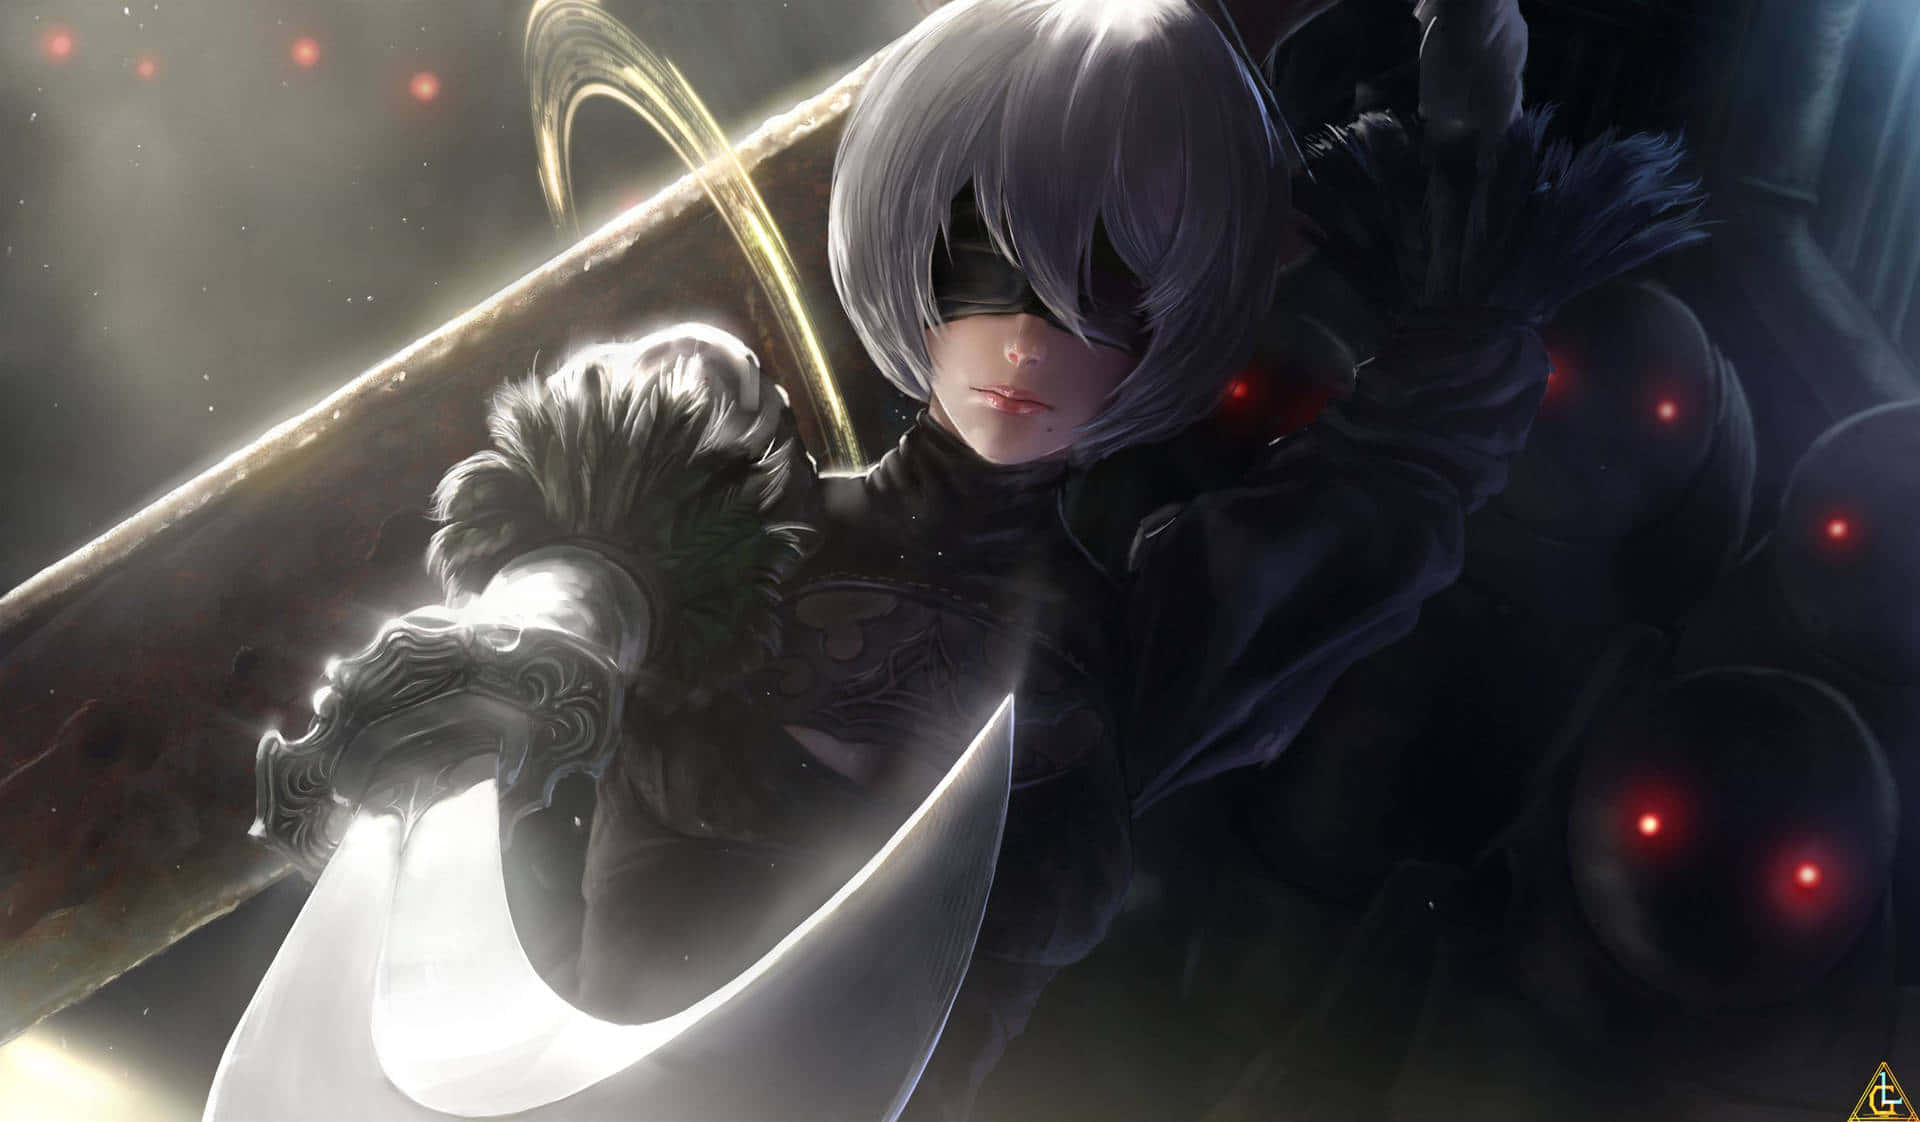 2B, the protagonist of Nier Automata, stares into the distance.